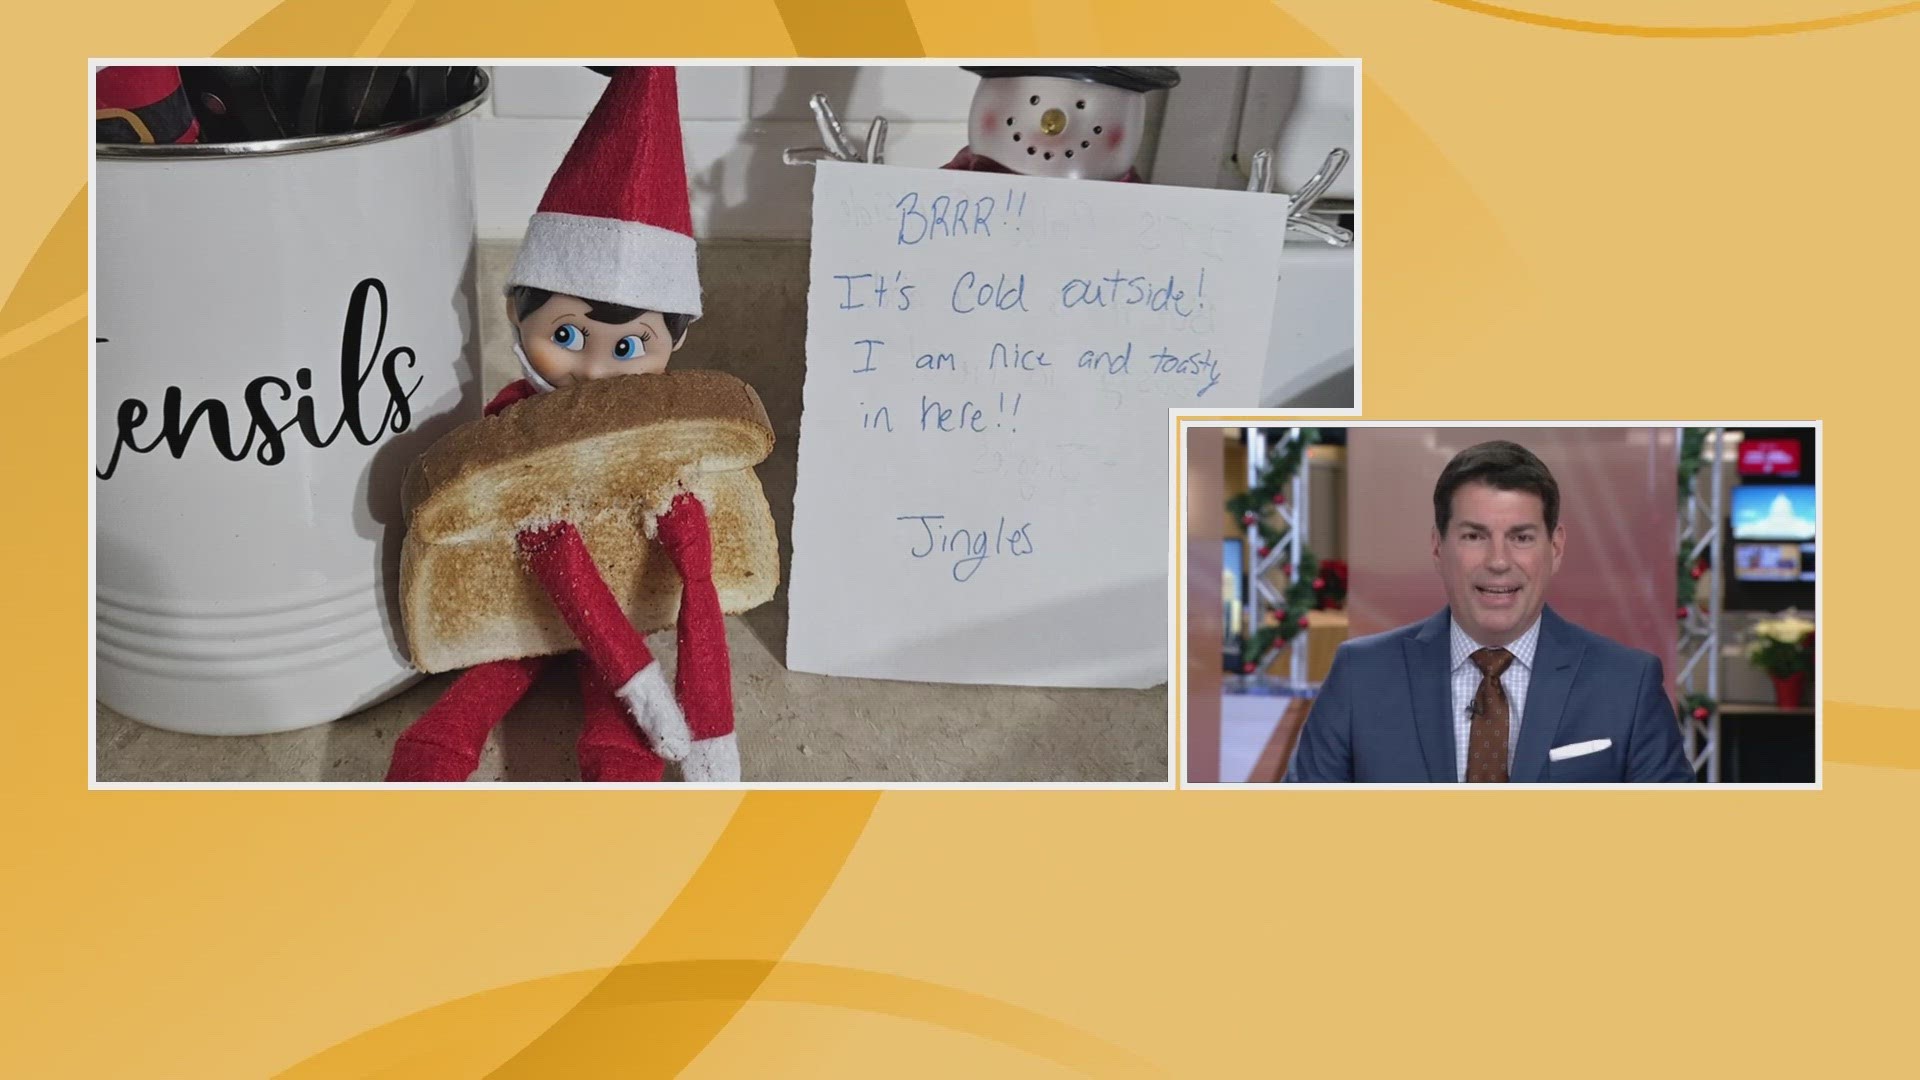 E-mail us at elf@wkyc.com with a picture of your Elf on the Shelf, and we might include your submissions on TV and online.